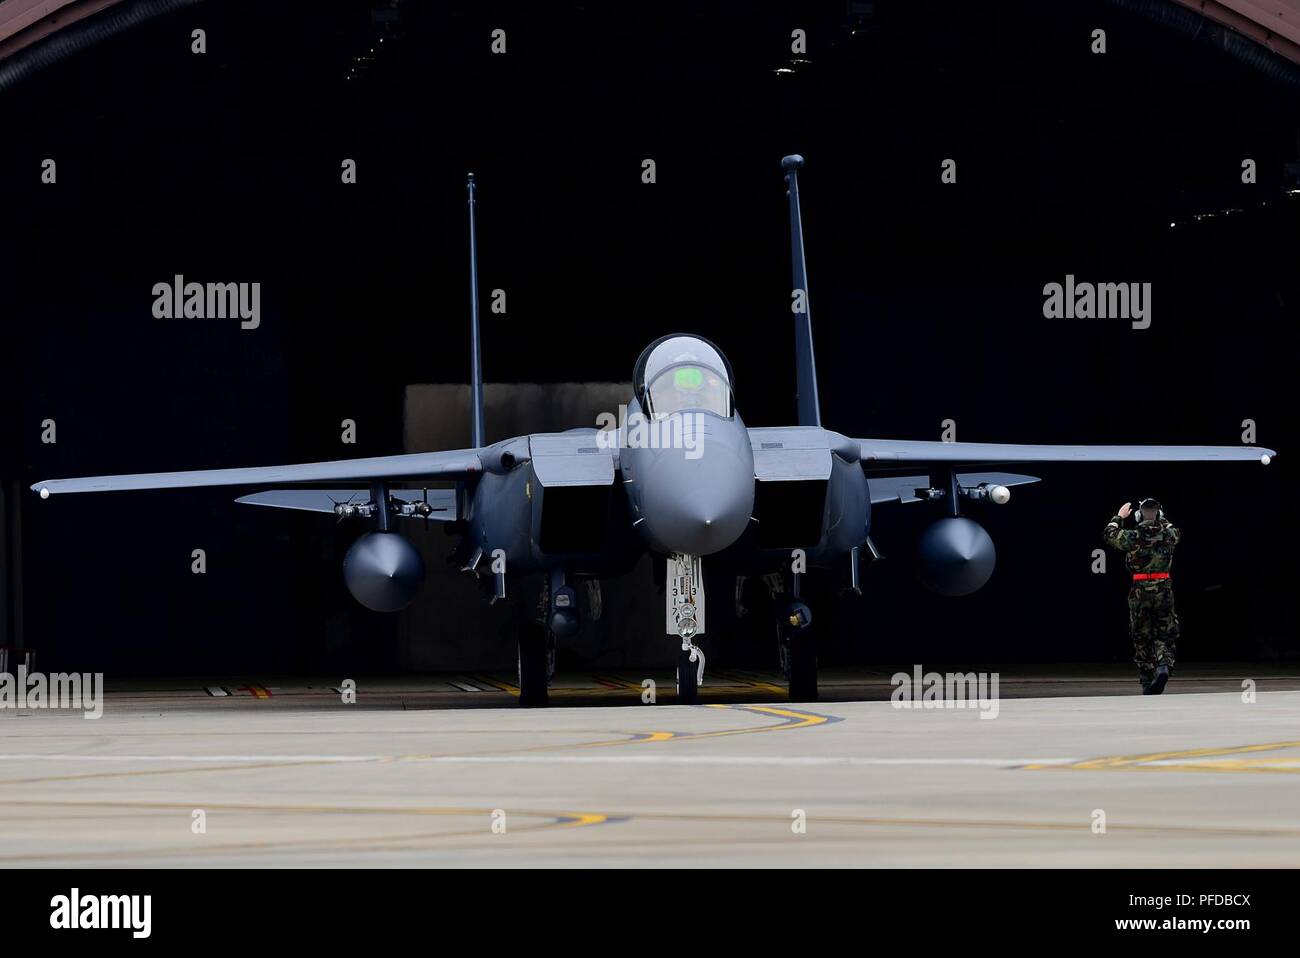 A crew chief marshals out an F-15E Strike Eagle assigned to the 492nd Fighter Squadron during a readiness exercise at Royal Air Force Lakenheath, England, June 5, 2018. Exercise scenarios are designed to emphasize the importance of combat skills effectiveness training and ensure Liberty Wing Airmen are fully prepared for potential contingencies. Stock Photo